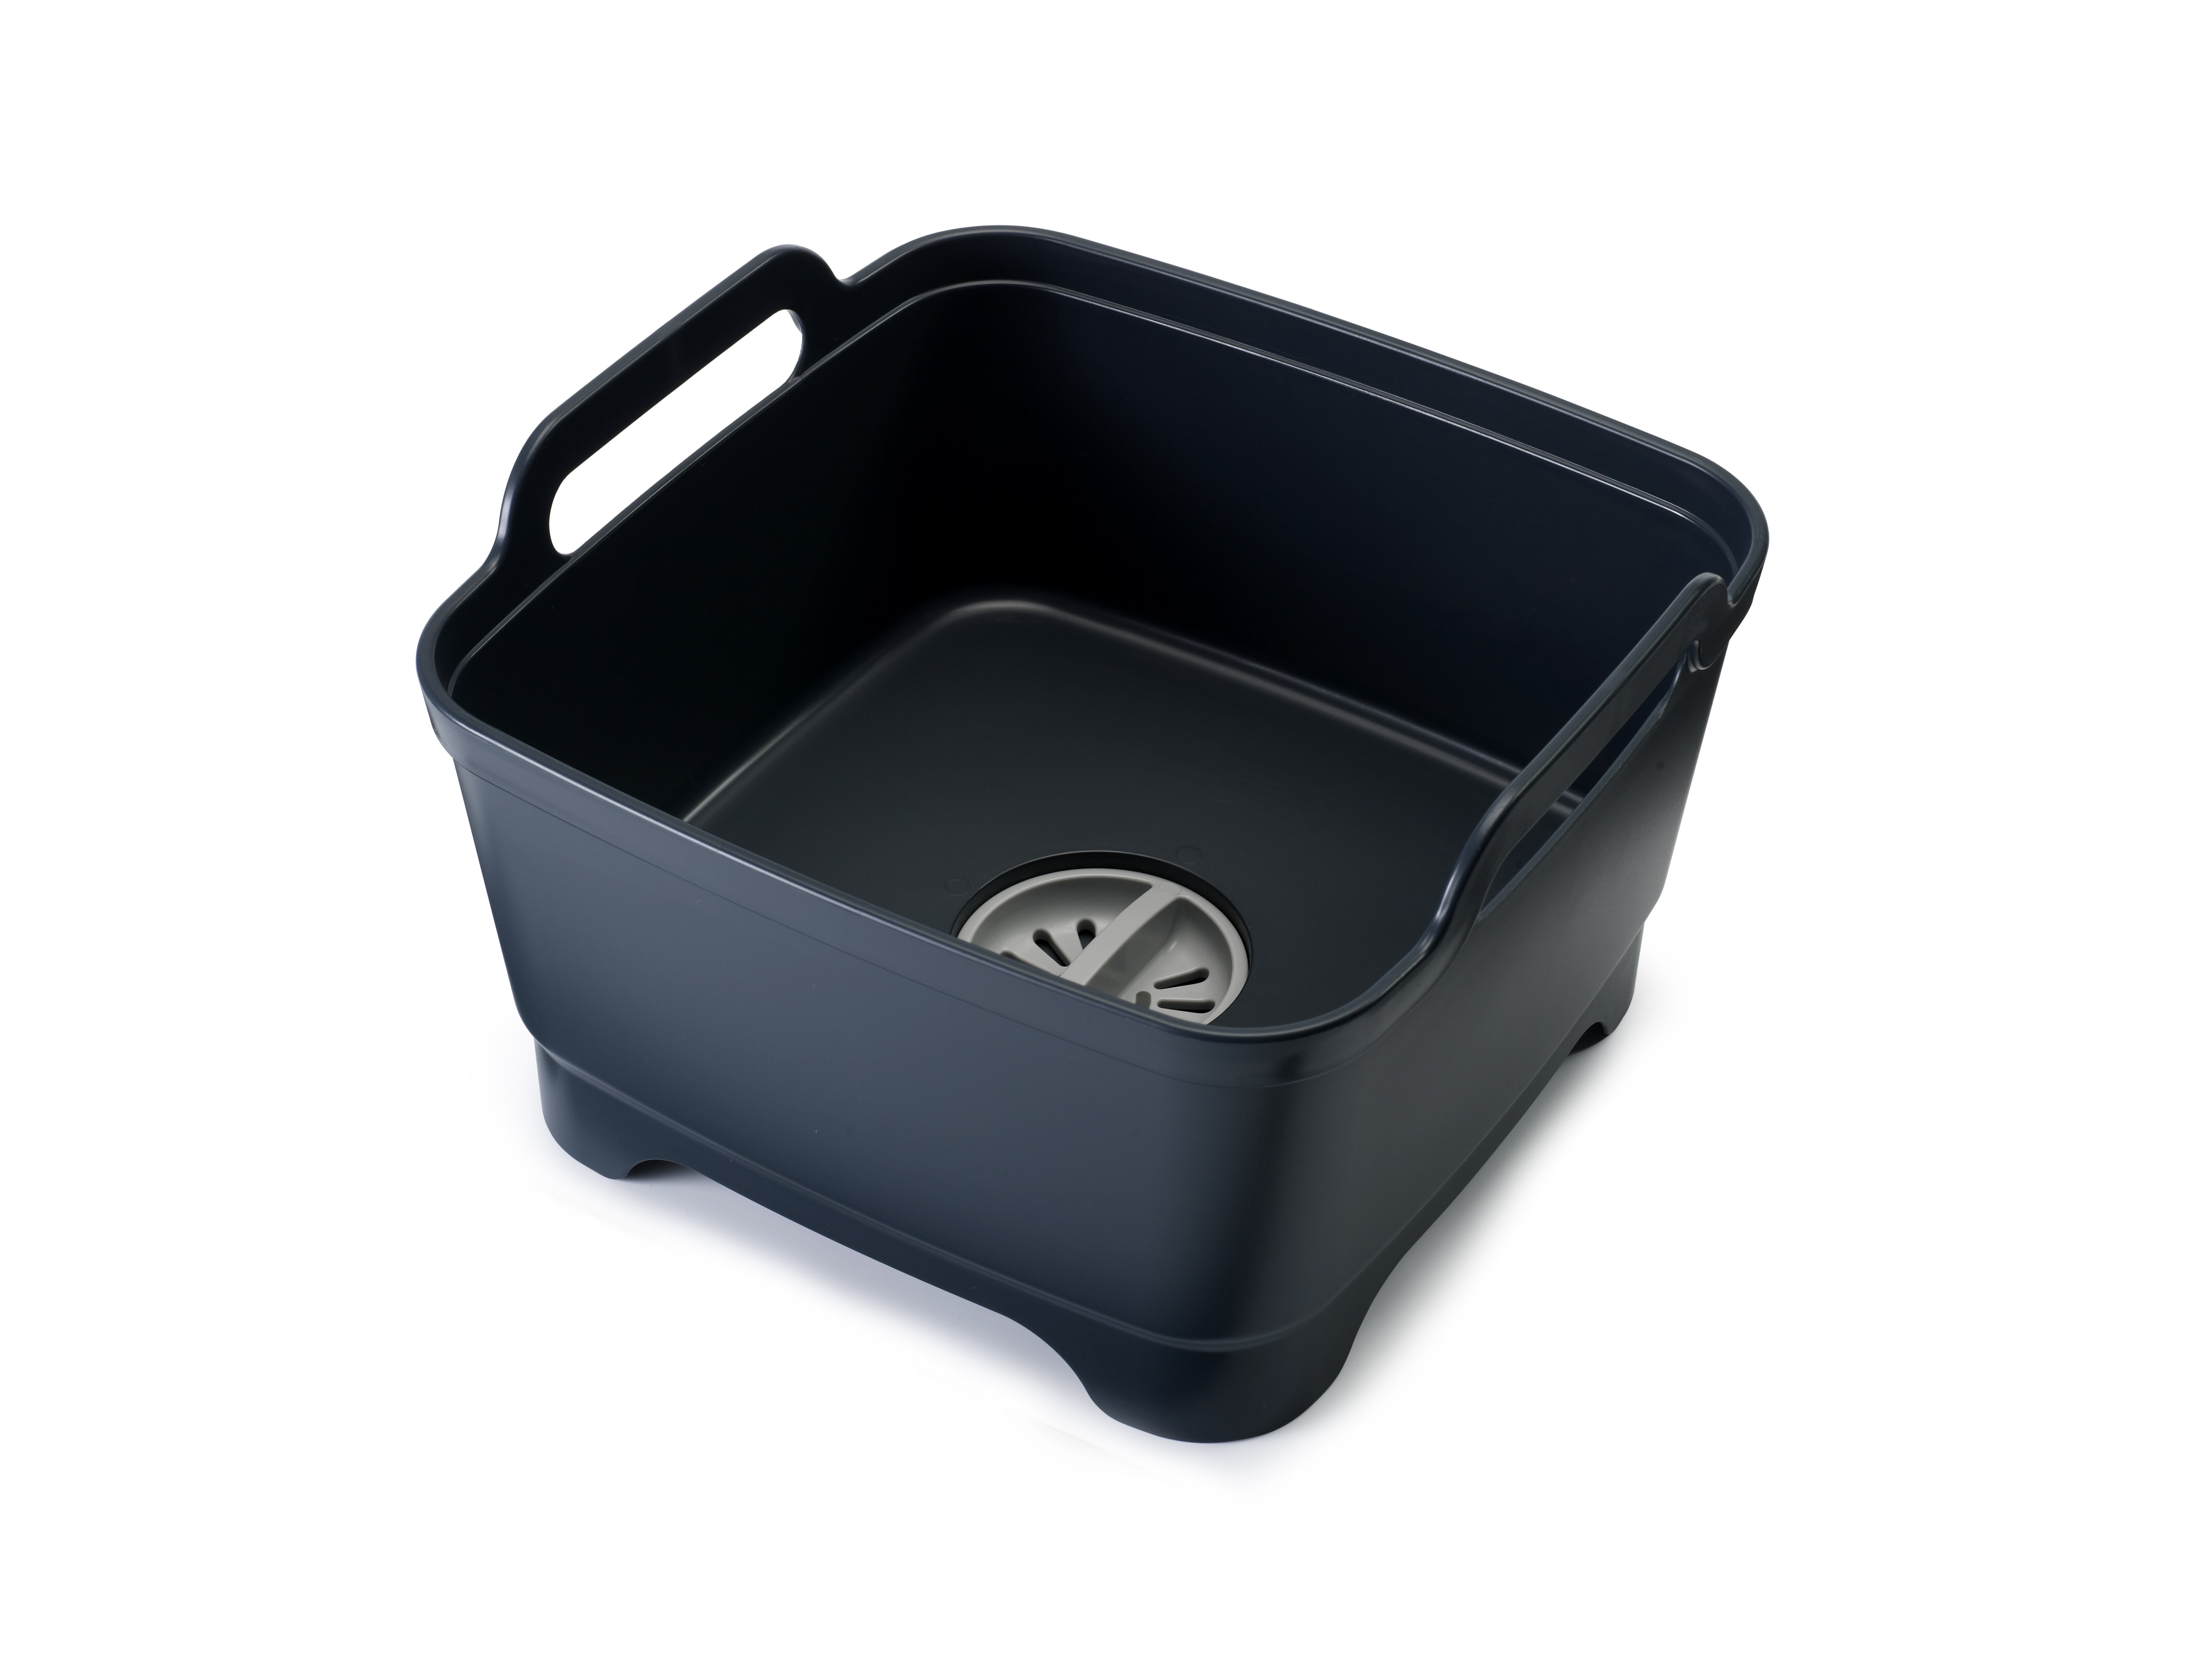 Simplify Self Draining Collapsible Sink Caddy & Reviews